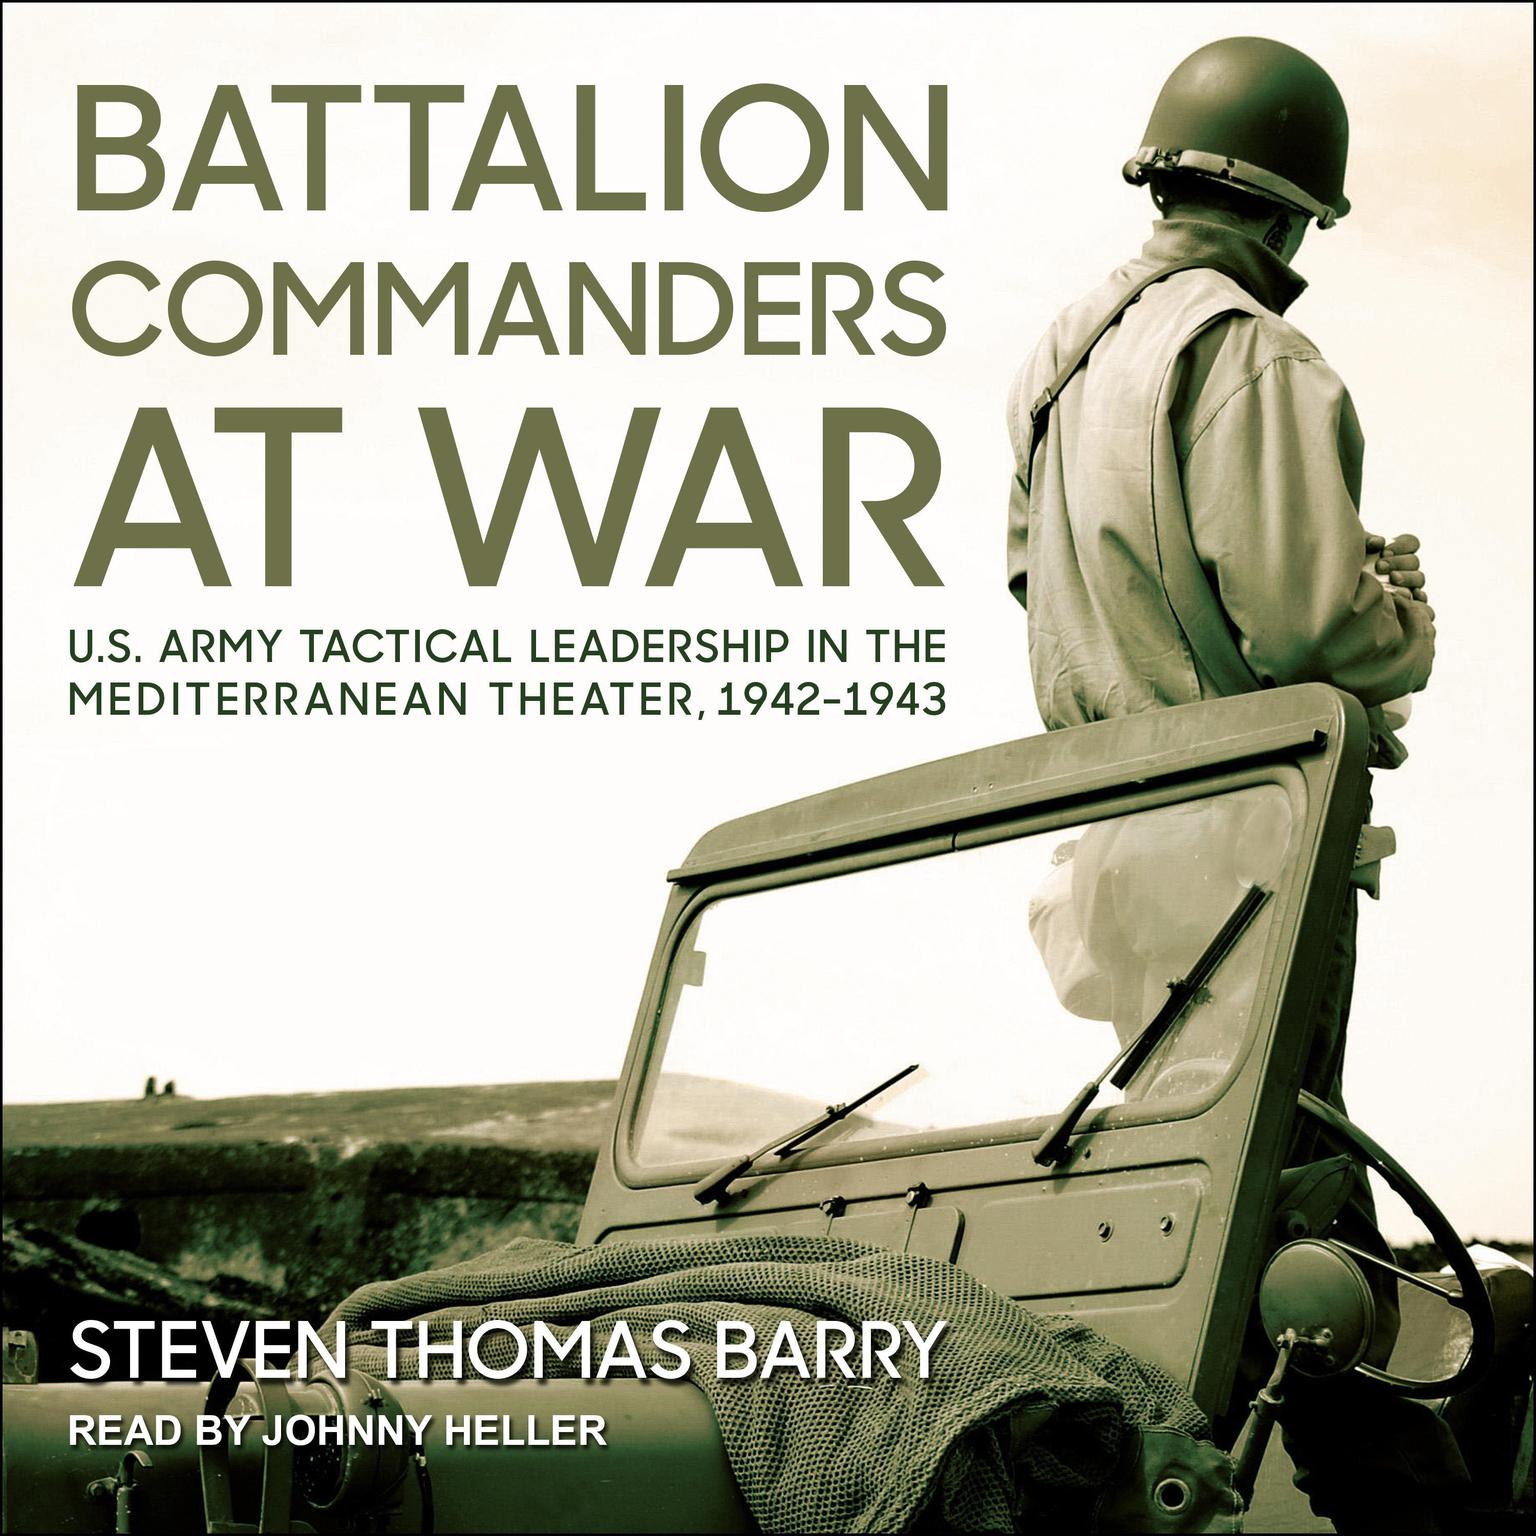 Battalion Commanders at War: U.S. Army Tactical Leadership in the Mediterranean Theater, 1942-1943 Audiobook, by Steven Thomas Barry